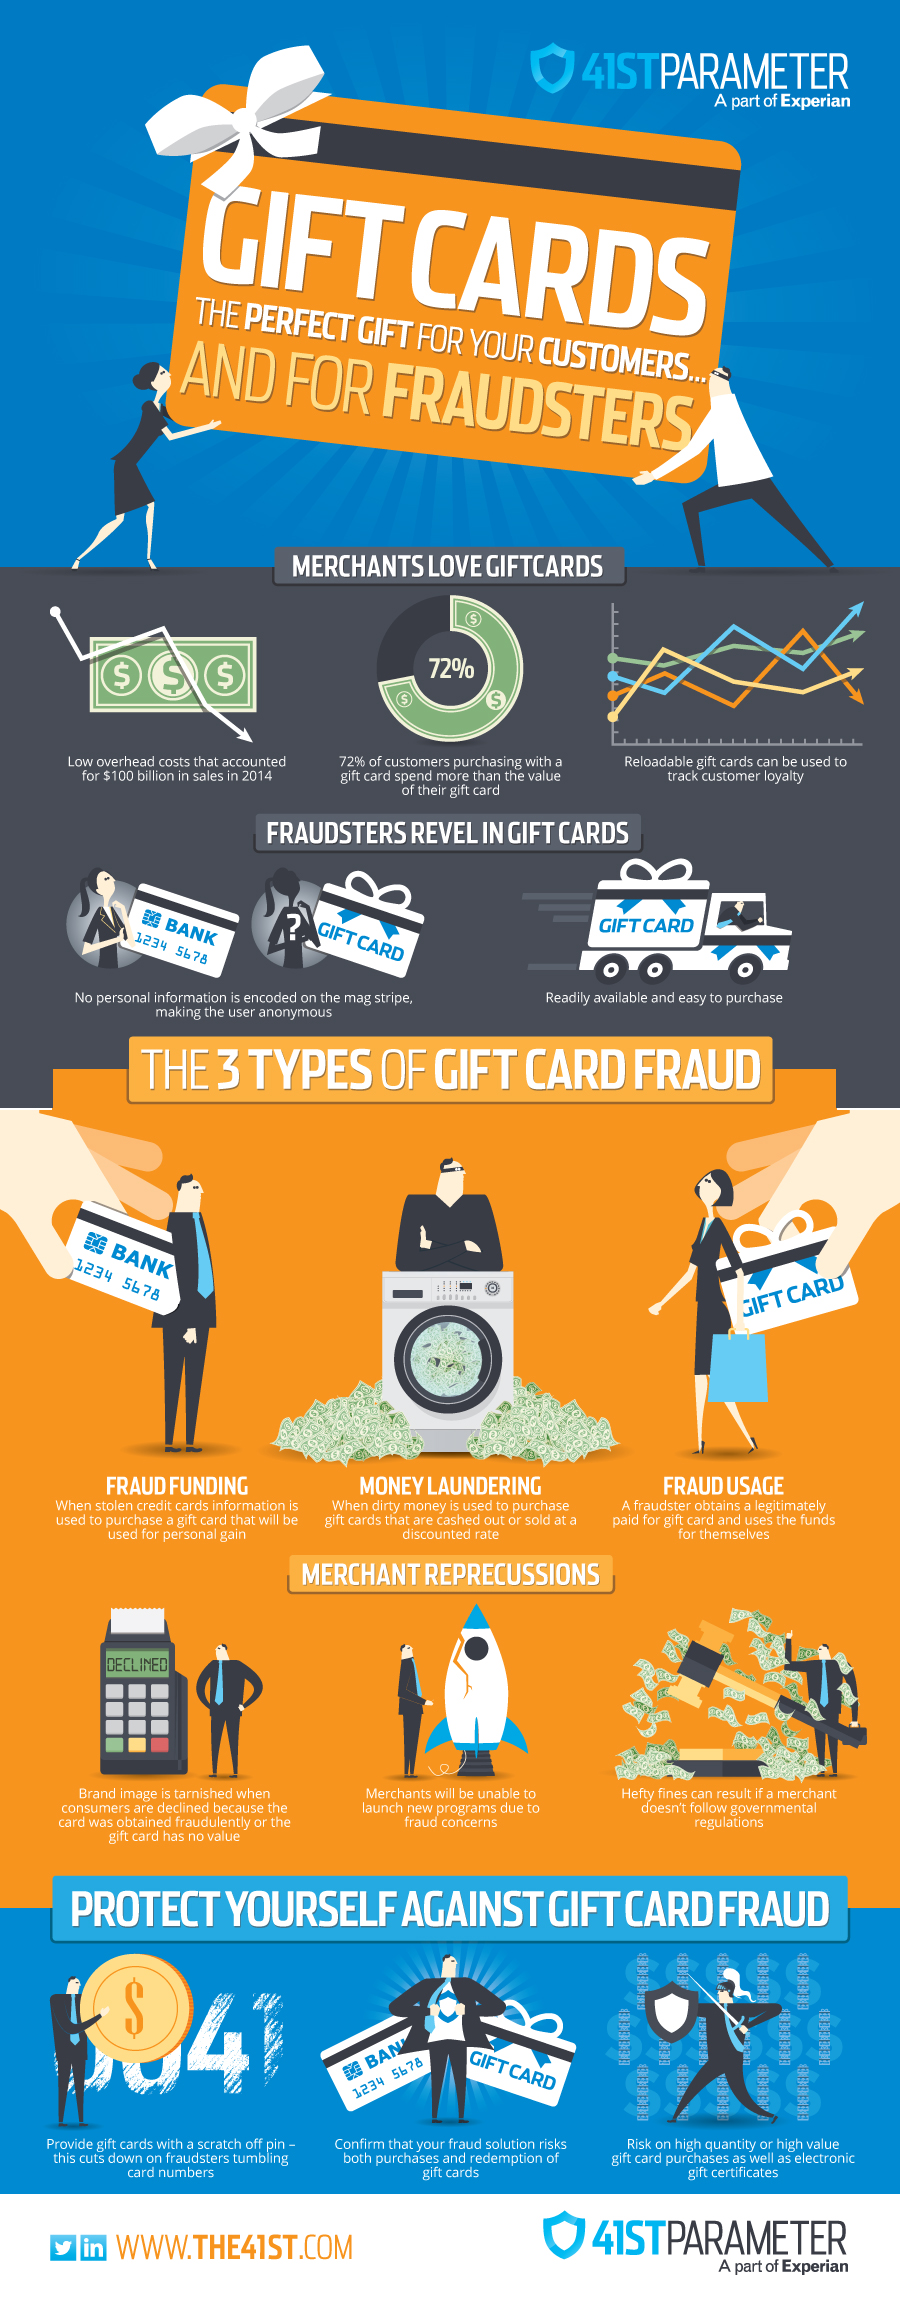 41st_GiftCard_Fraud_Infographic